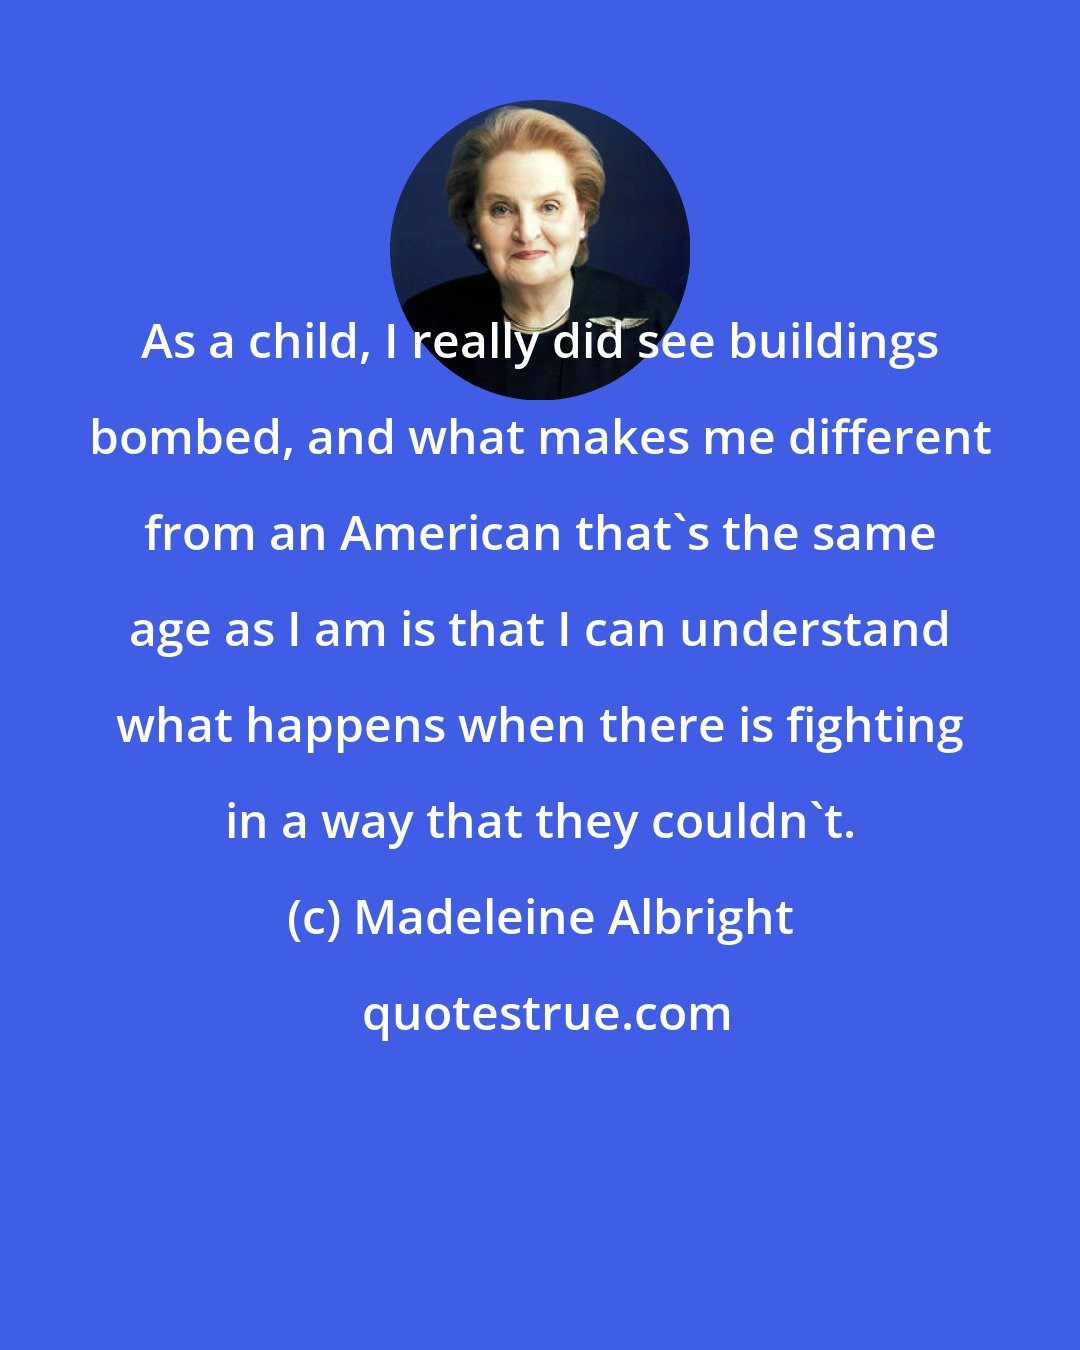 Madeleine Albright: As a child, I really did see buildings bombed, and what makes me different from an American that's the same age as I am is that I can understand what happens when there is fighting in a way that they couldn't.